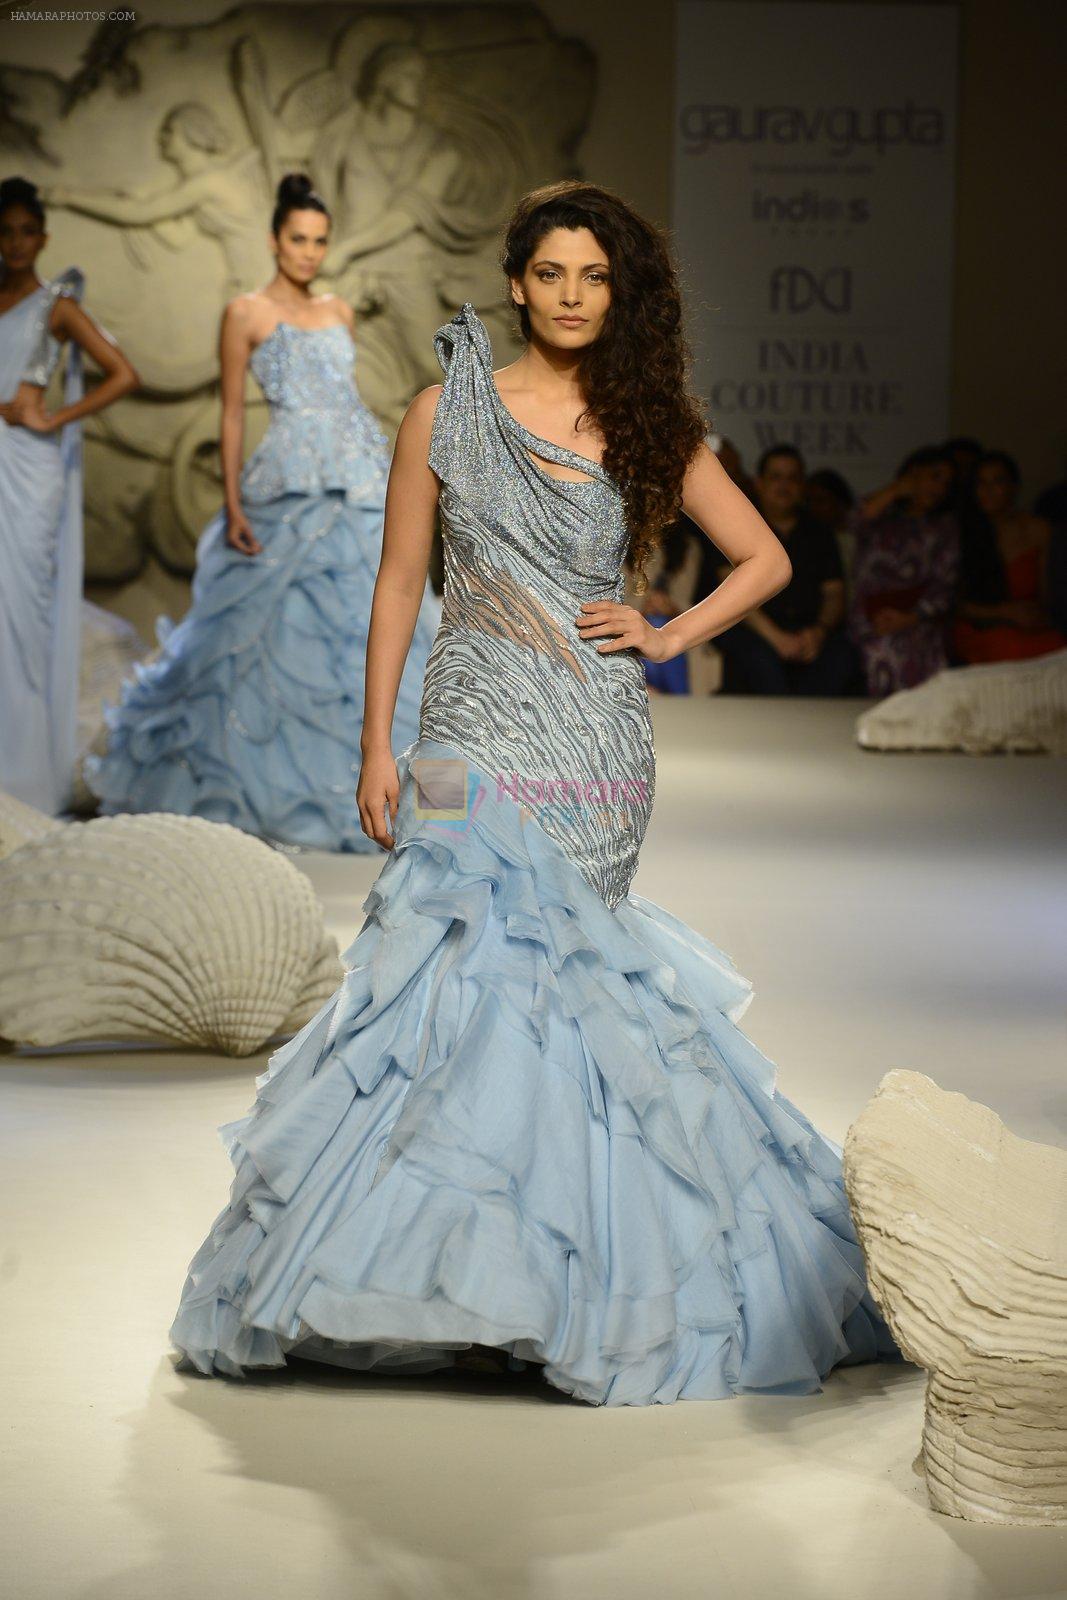 Saiyami Kher during showcase of Gaurav Gupta collection scape song at FDCI India Couture Week 2016 on 23 July 2016